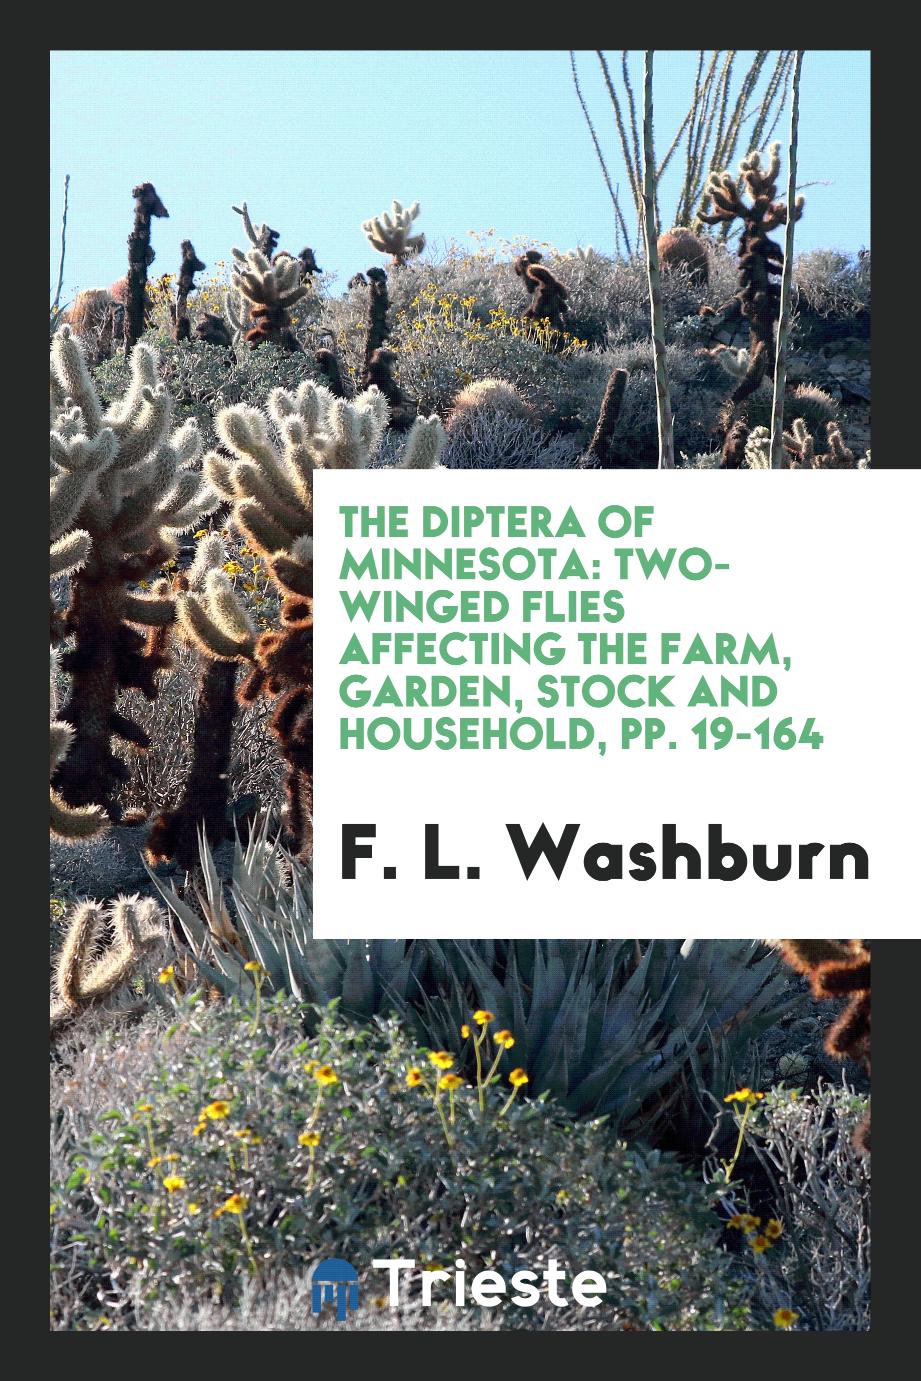 The Diptera of Minnesota: Two-Winged Flies Affecting the Farm, Garden, Stock and Household, pp. 19-164